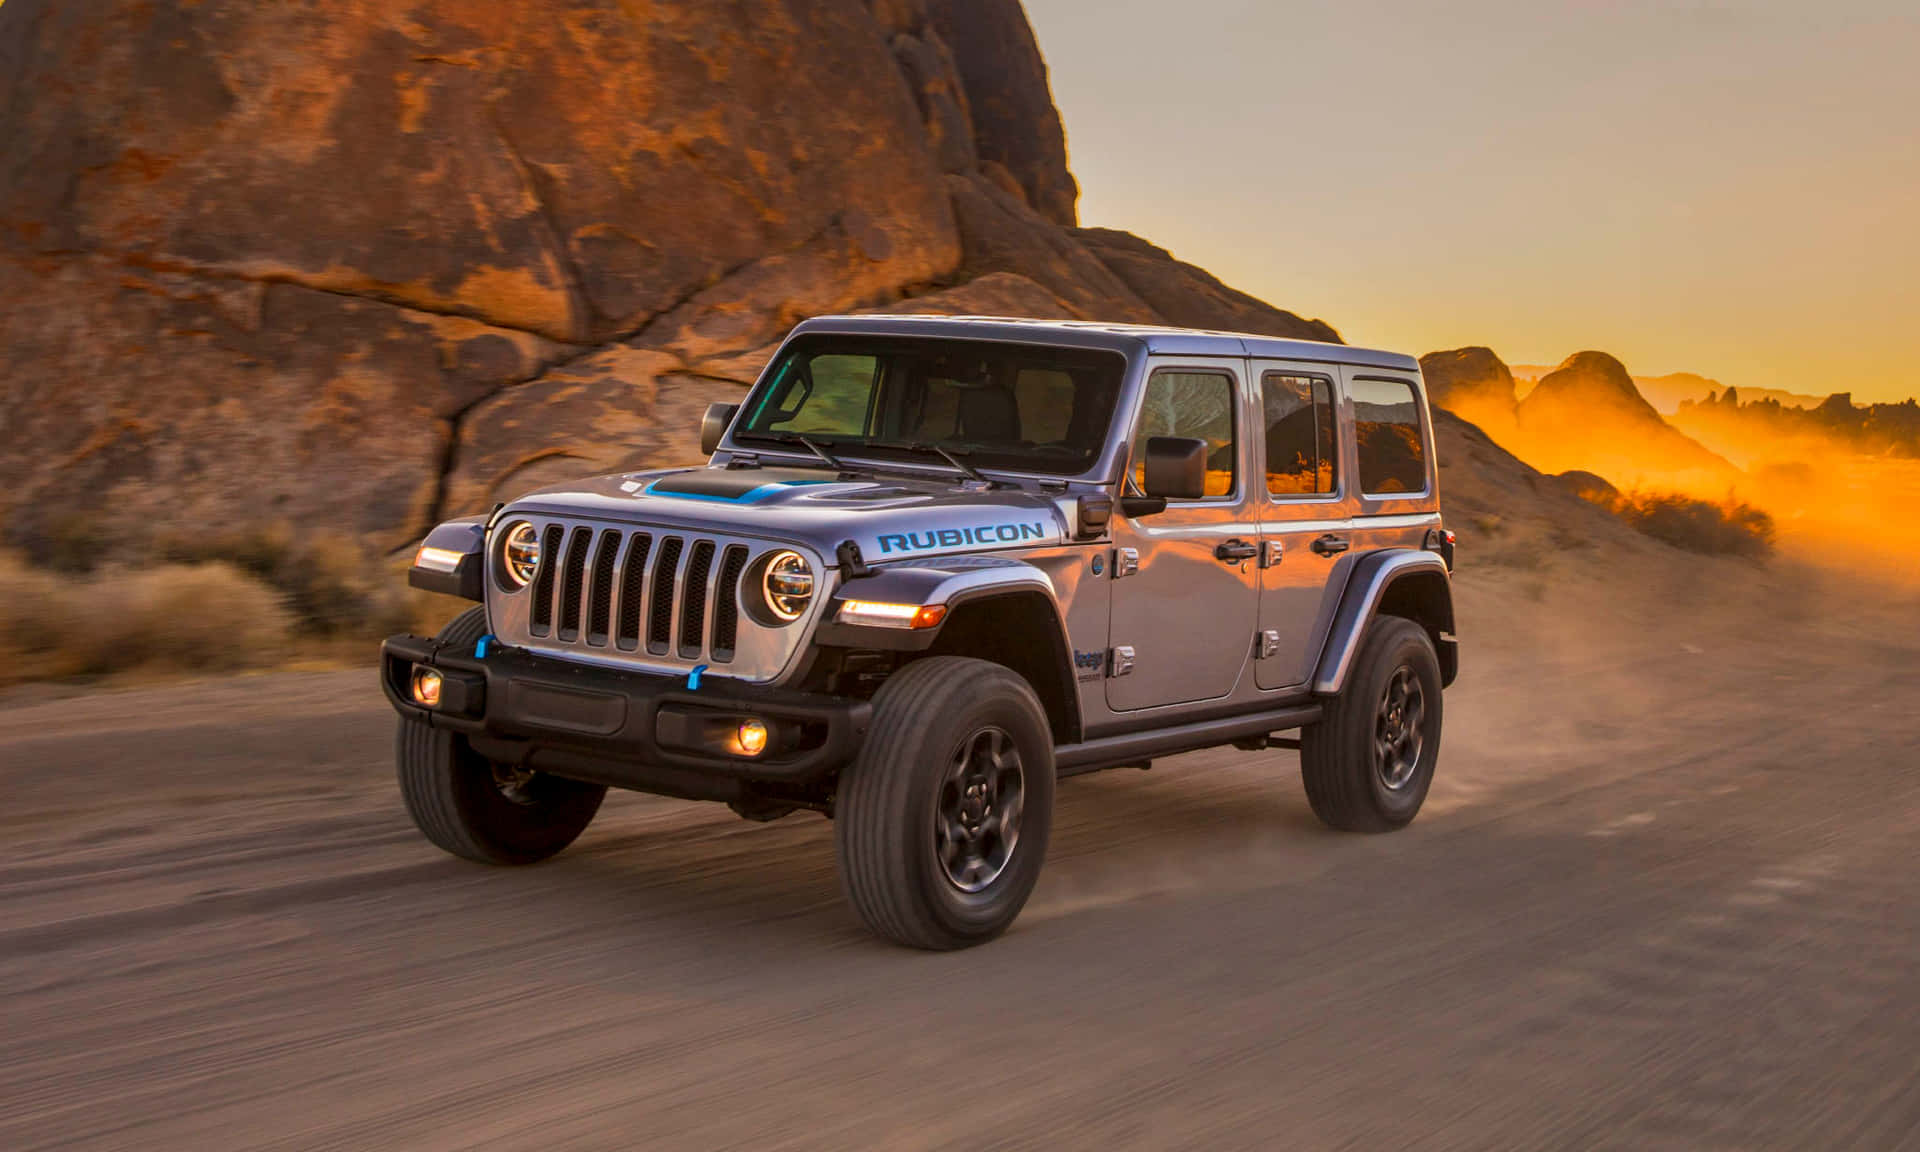 The 2020 Jeep Wrangler Is Driving Down A Dirt Road